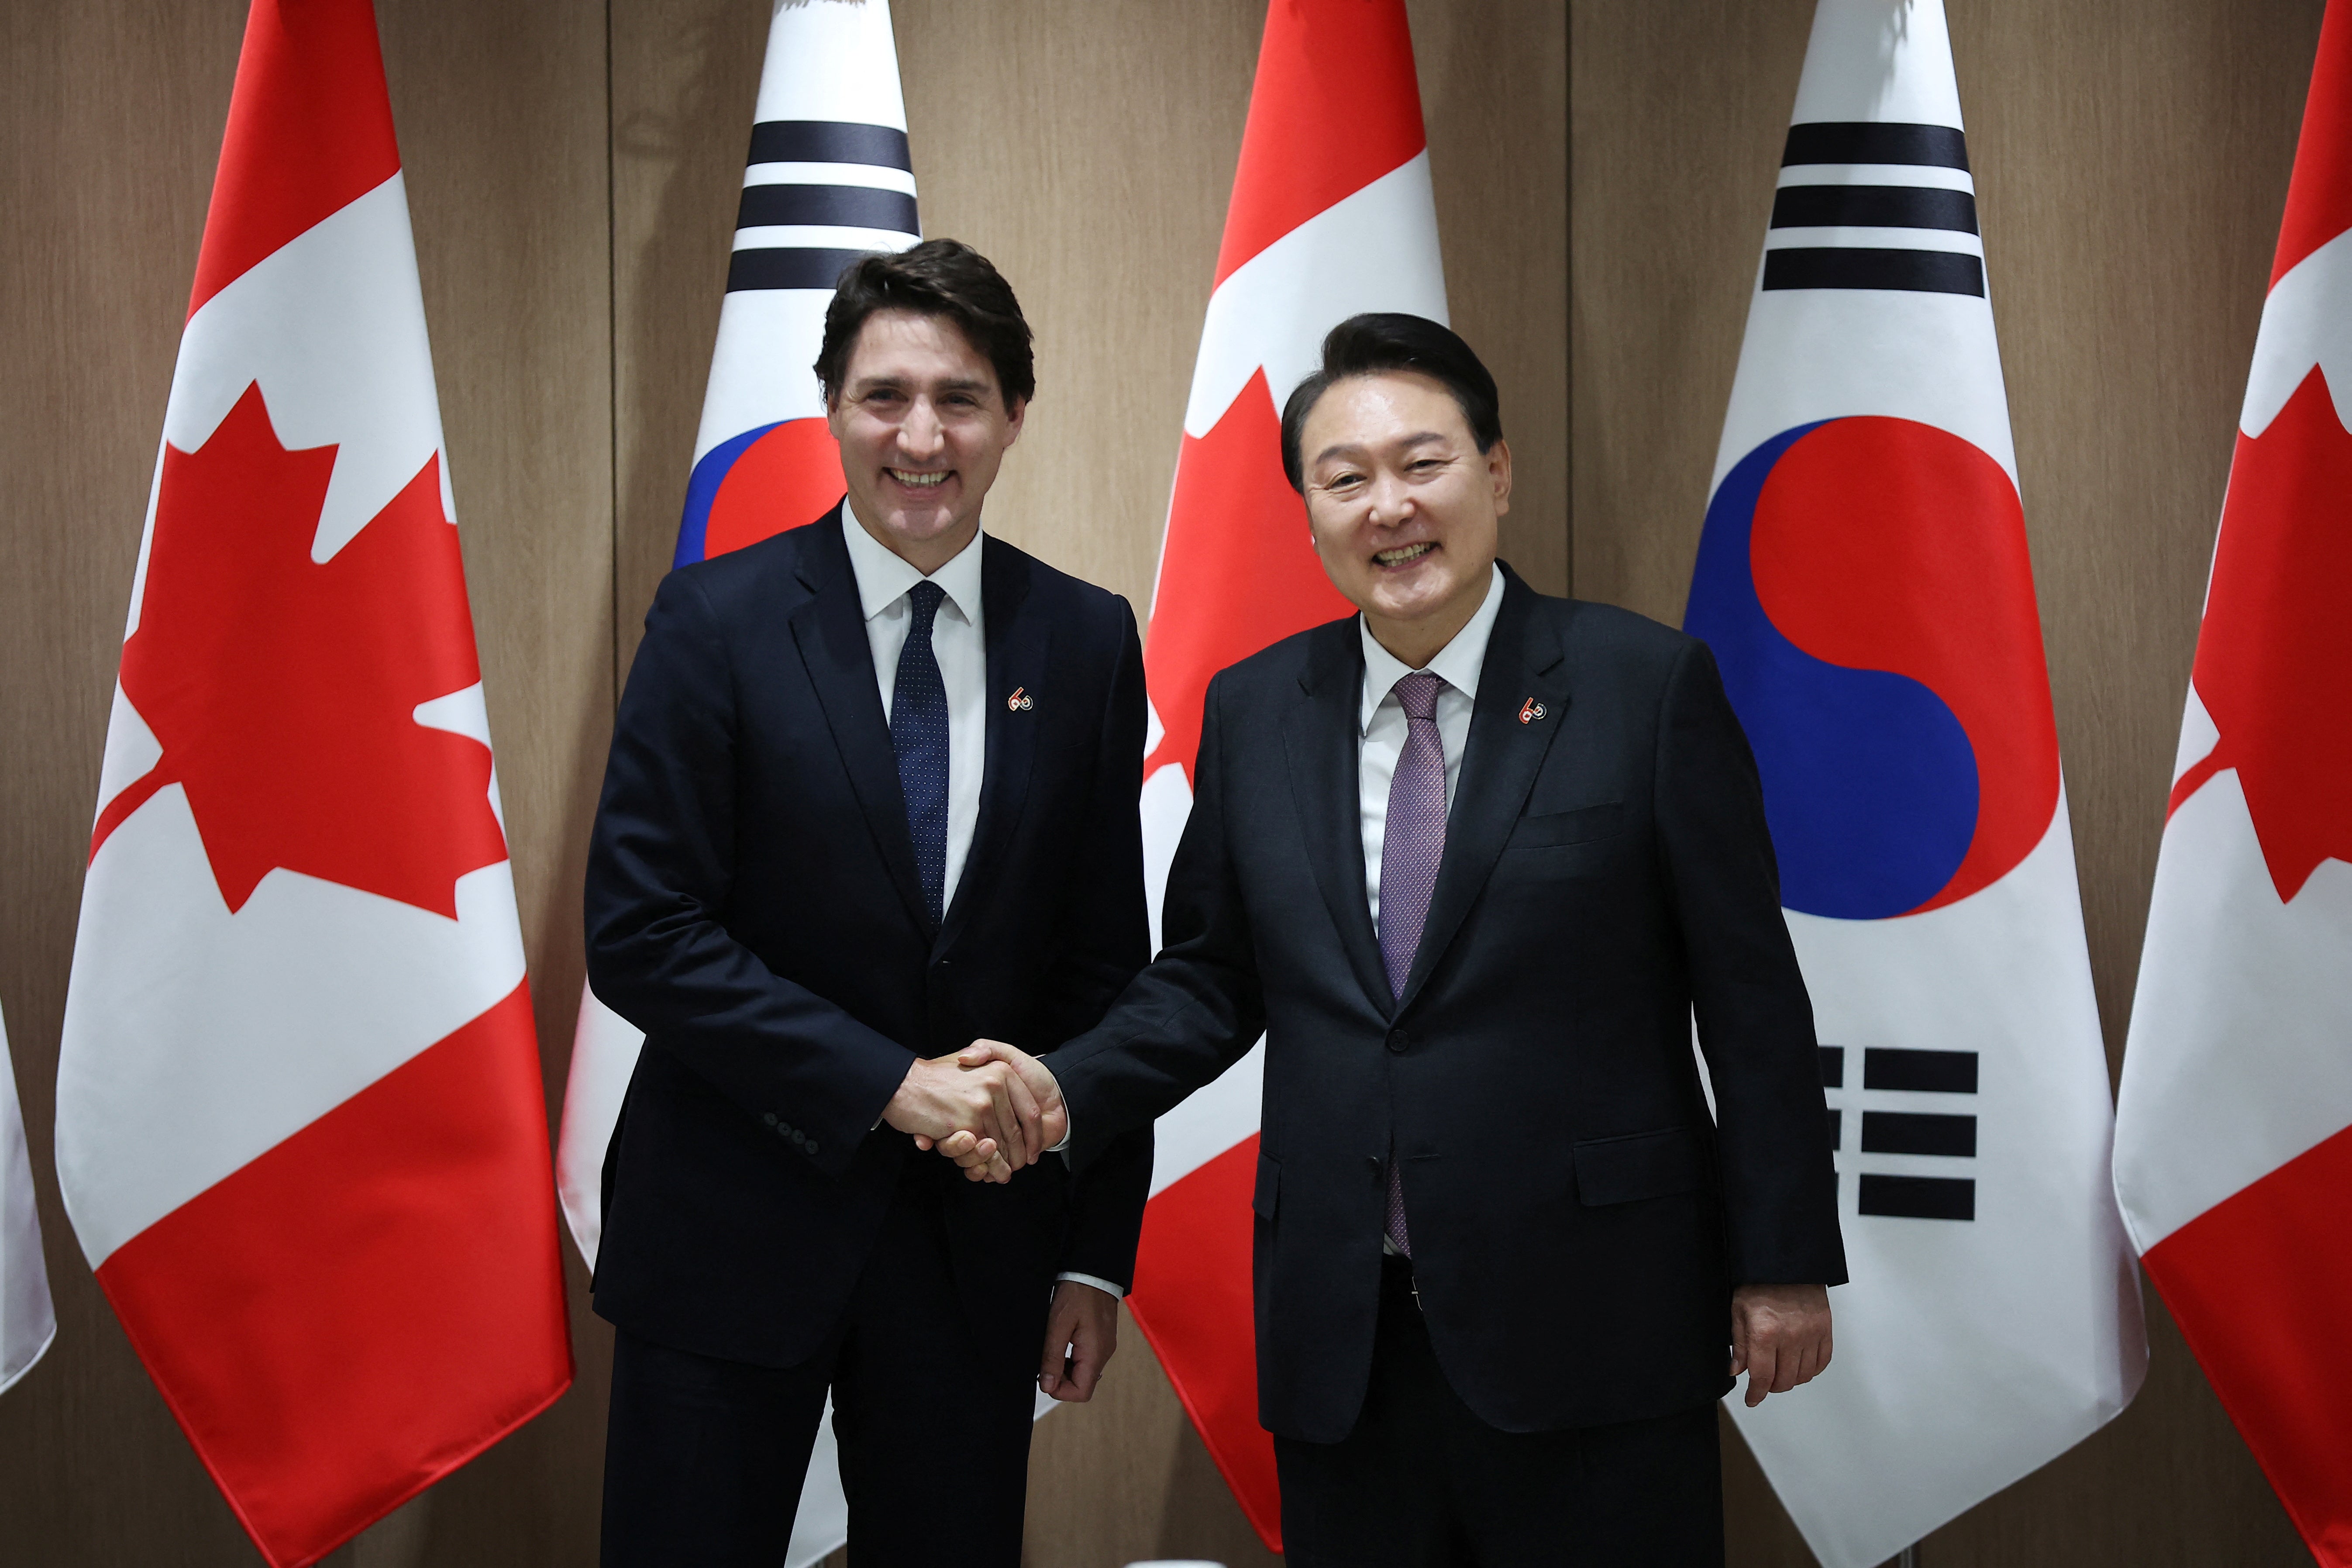 Canada’s Prime Minister Justin Trudeau shakes hands with South Korea’s President Yoon Suk Yeol during their meeting at the Presidential Office in Seoul